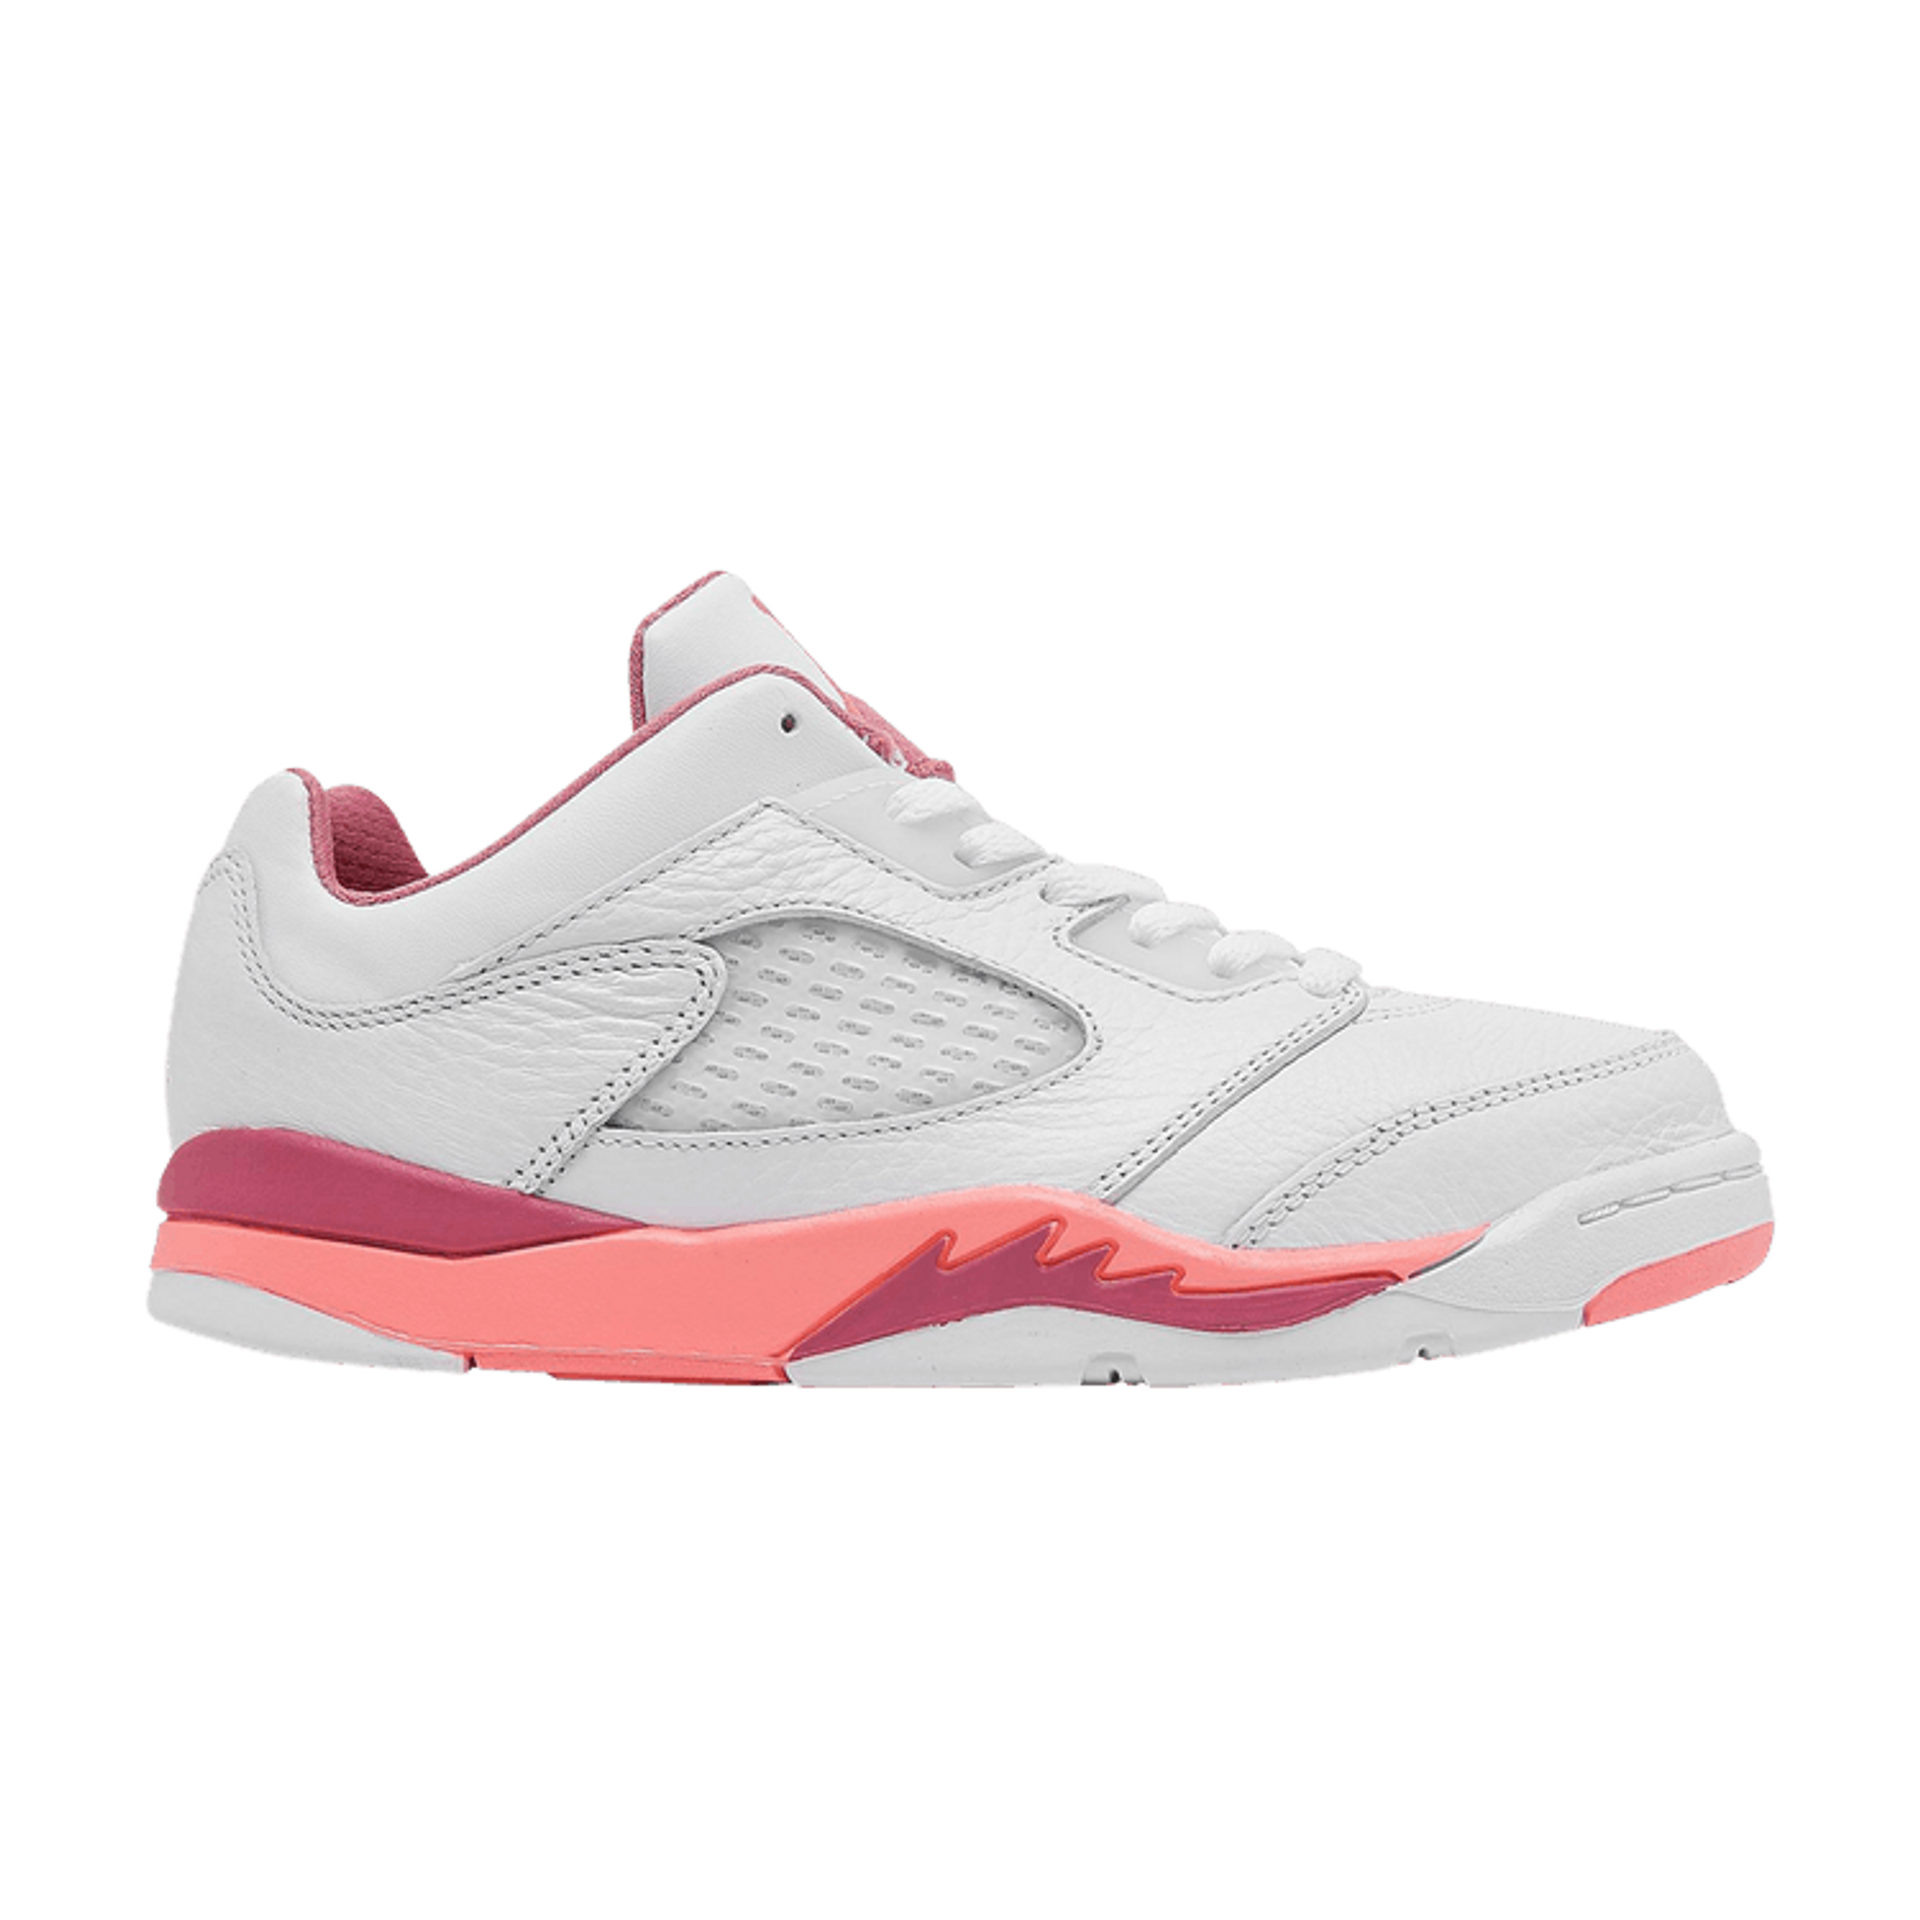 Air Jordan 5 Retro Low PS 'Crafted For Her'